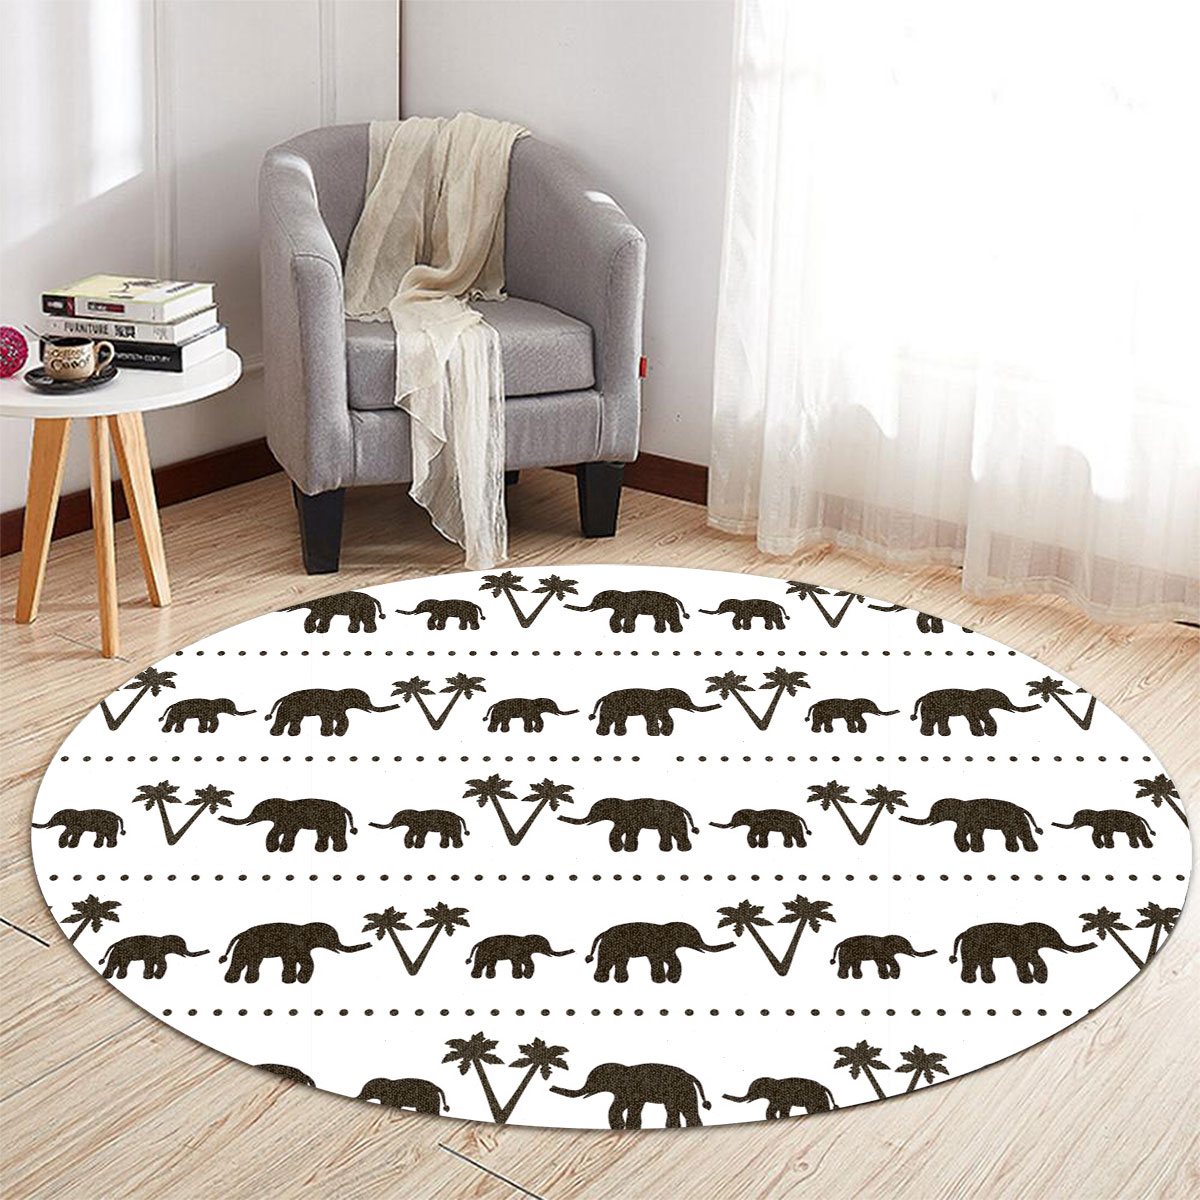 Black And White African Elephant Round Carpet 6